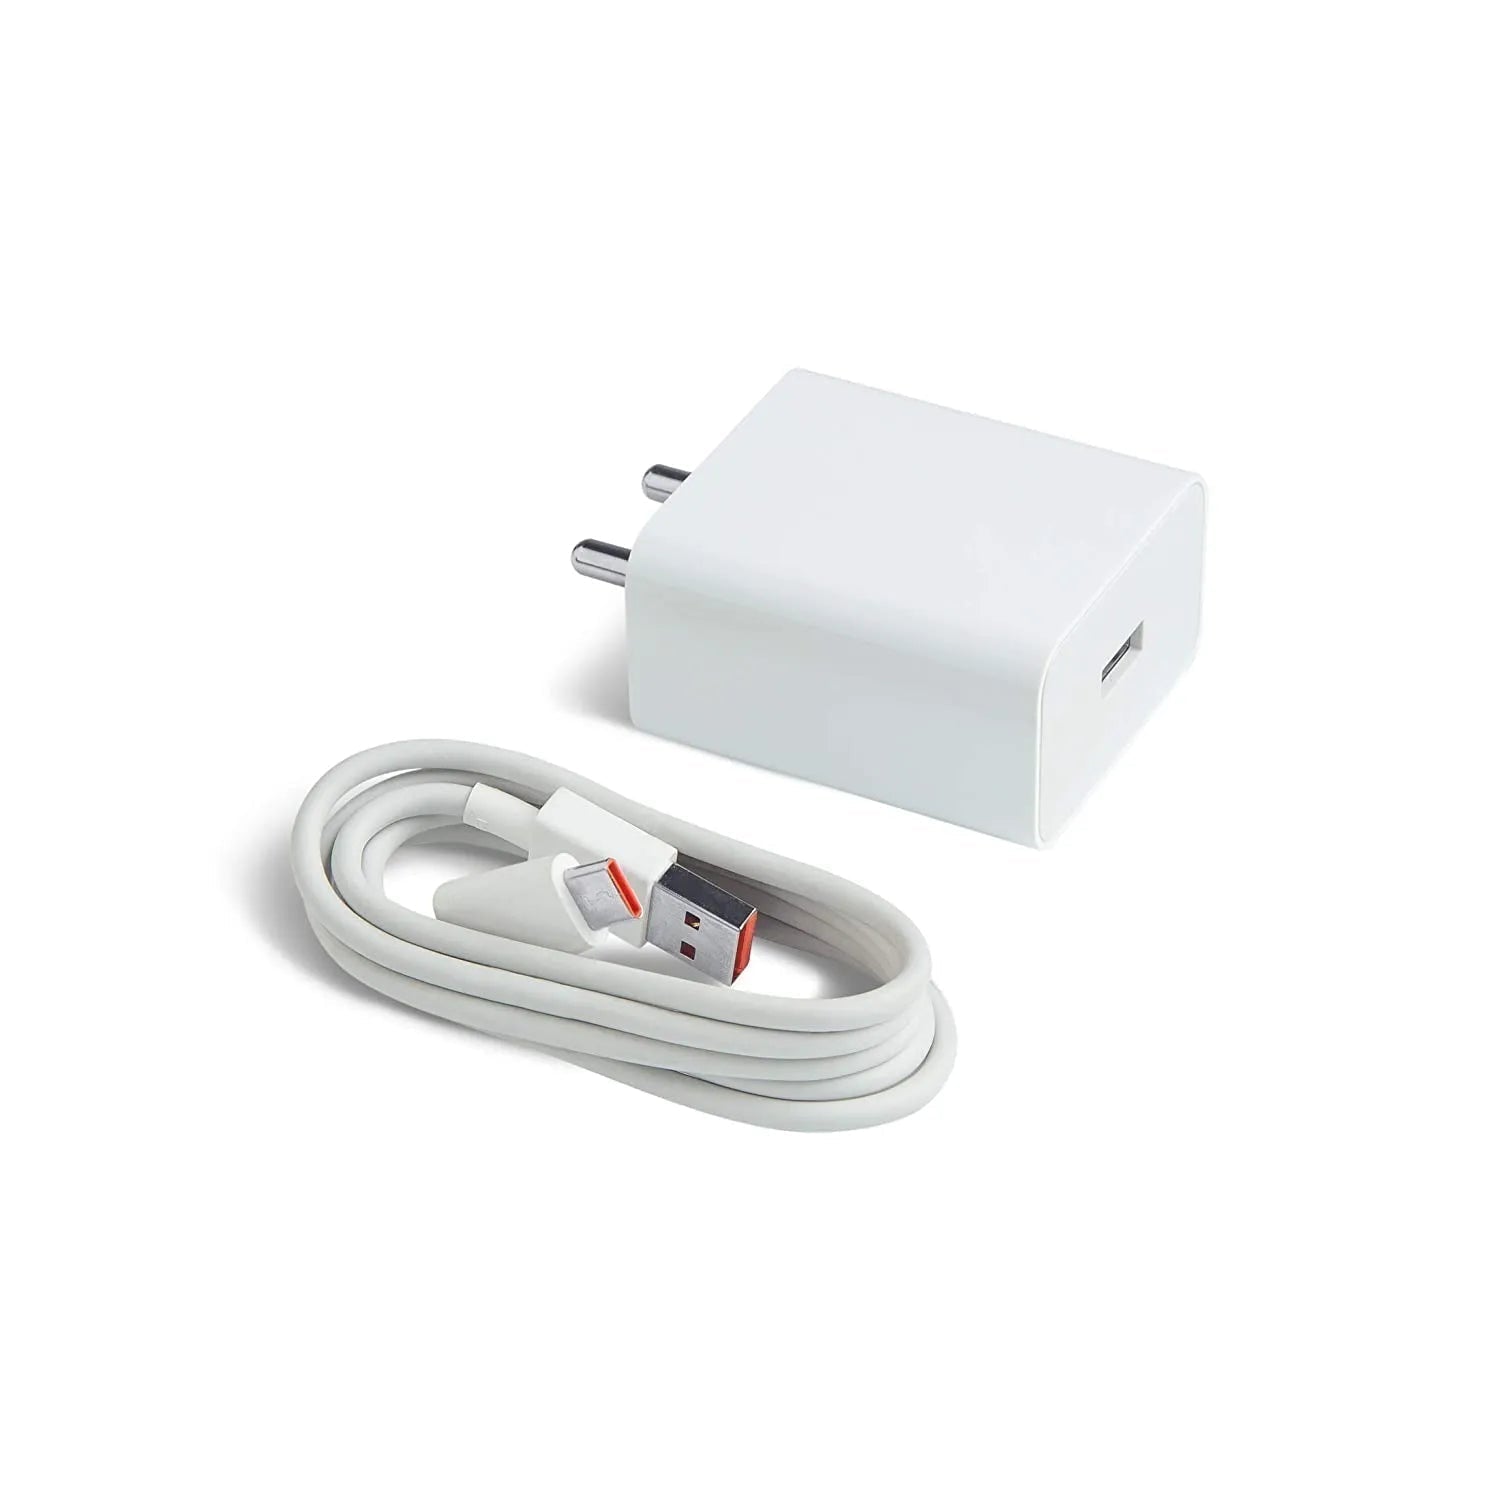 Mi Redmi Note 10 Pro 33W Fast SonicCharge 2.0 Charger With Type C Cable (White)